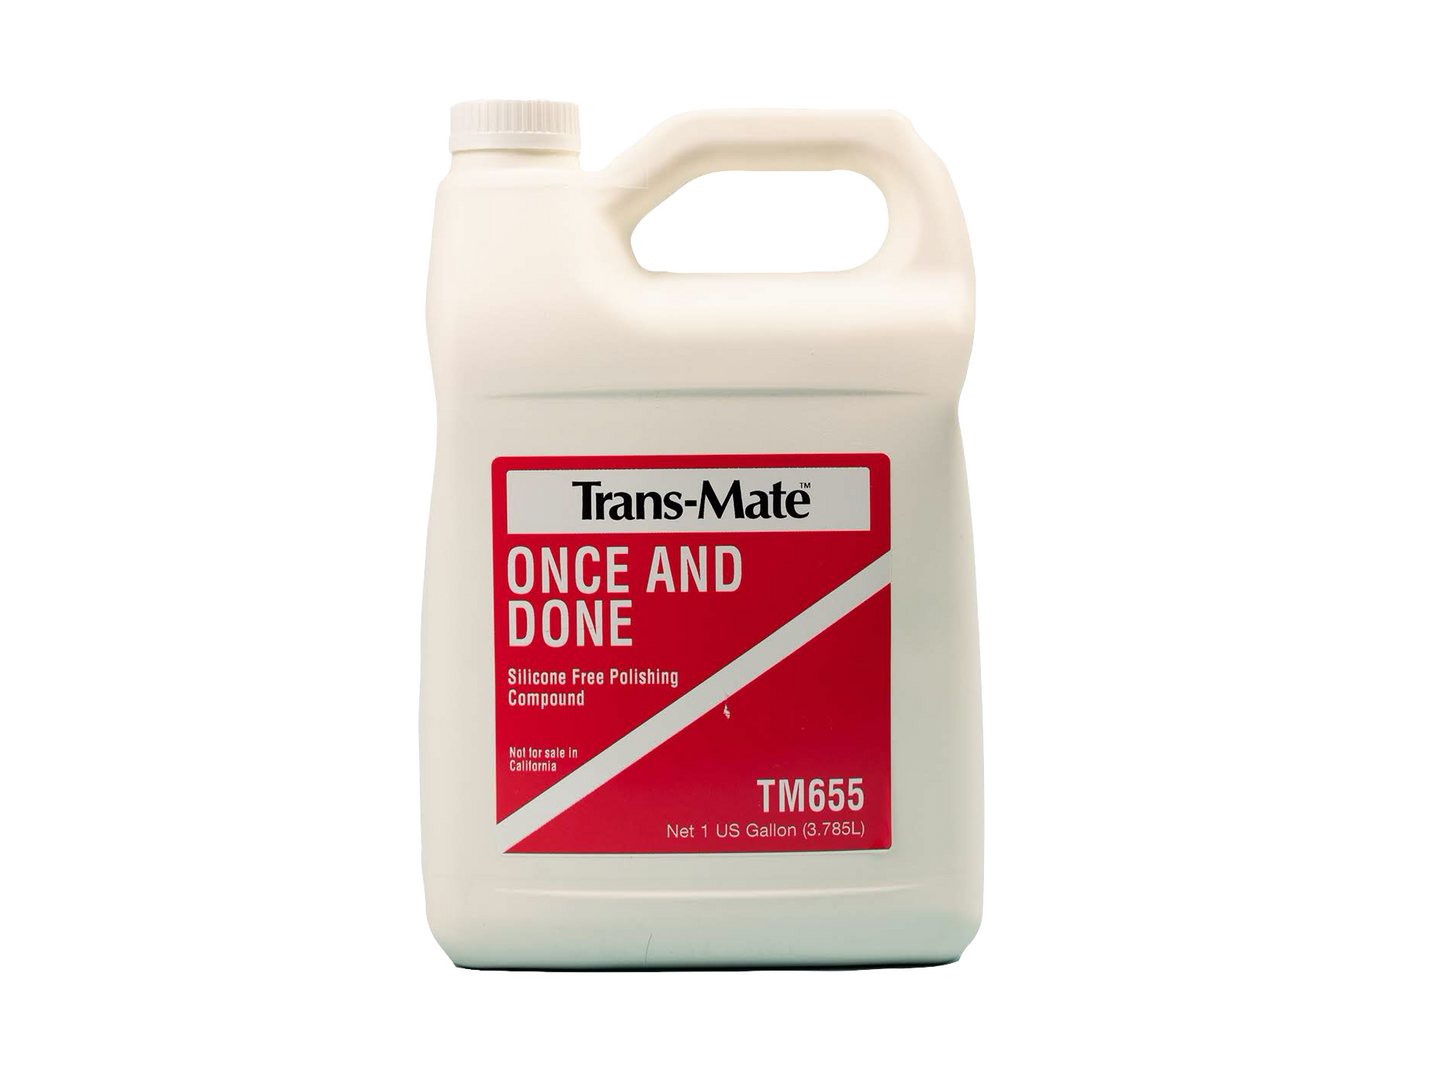 Trans-Mate Once and Done